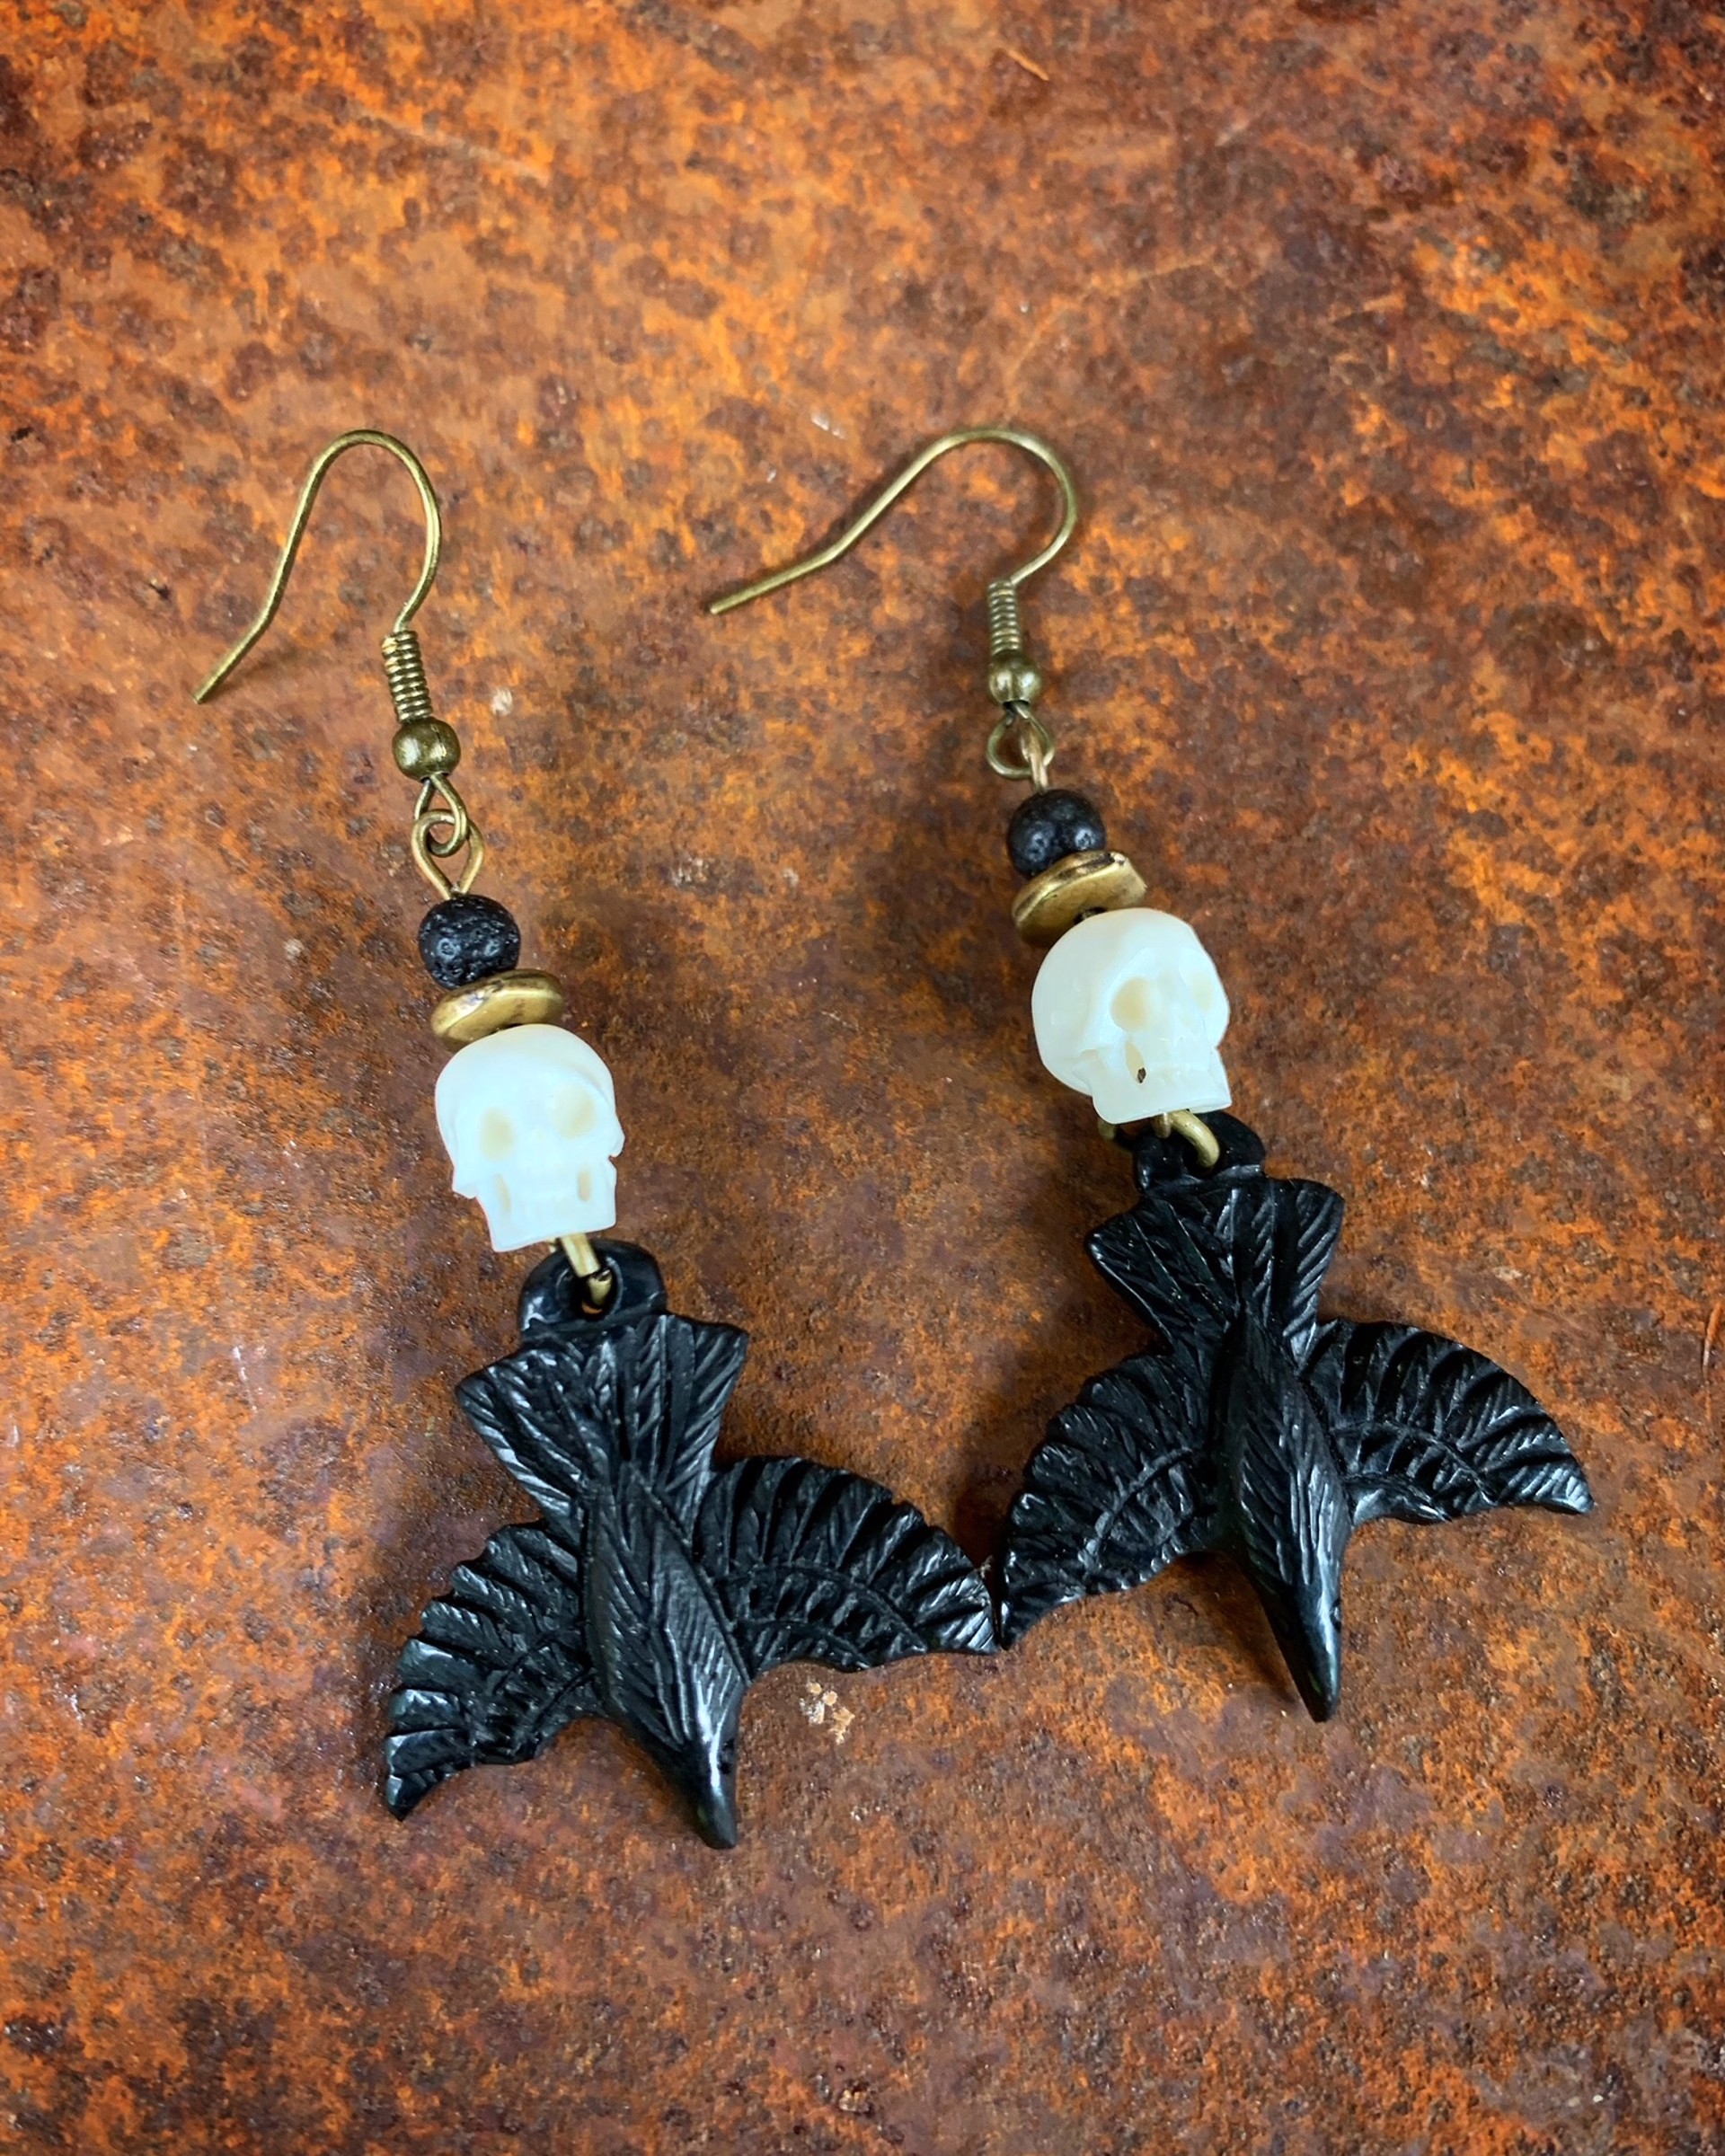 K838 Buffalo Horn Ravens with Carved Bone Skulls by Kelly Ormsby